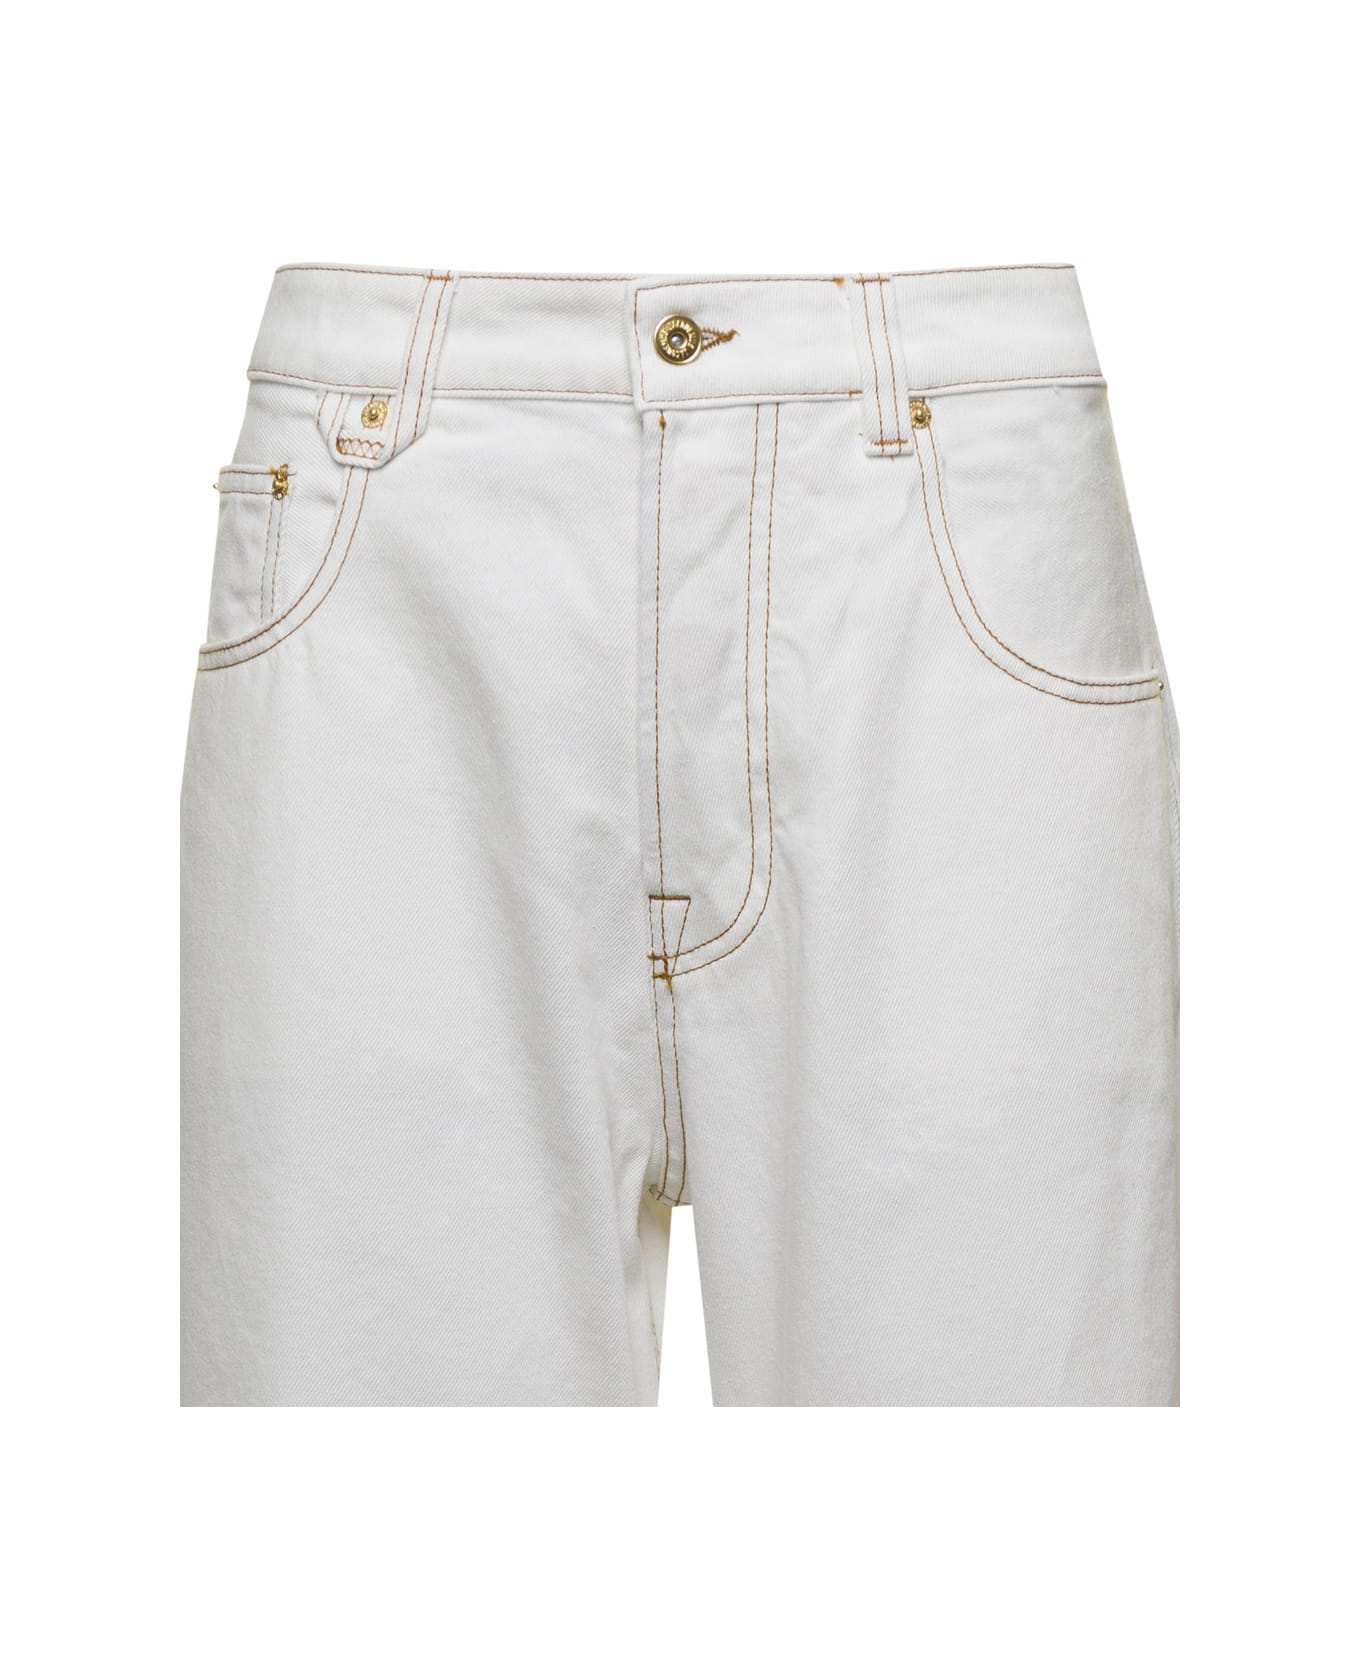 Jacquemus Baggy Denim Pant - Off-white/tabaac